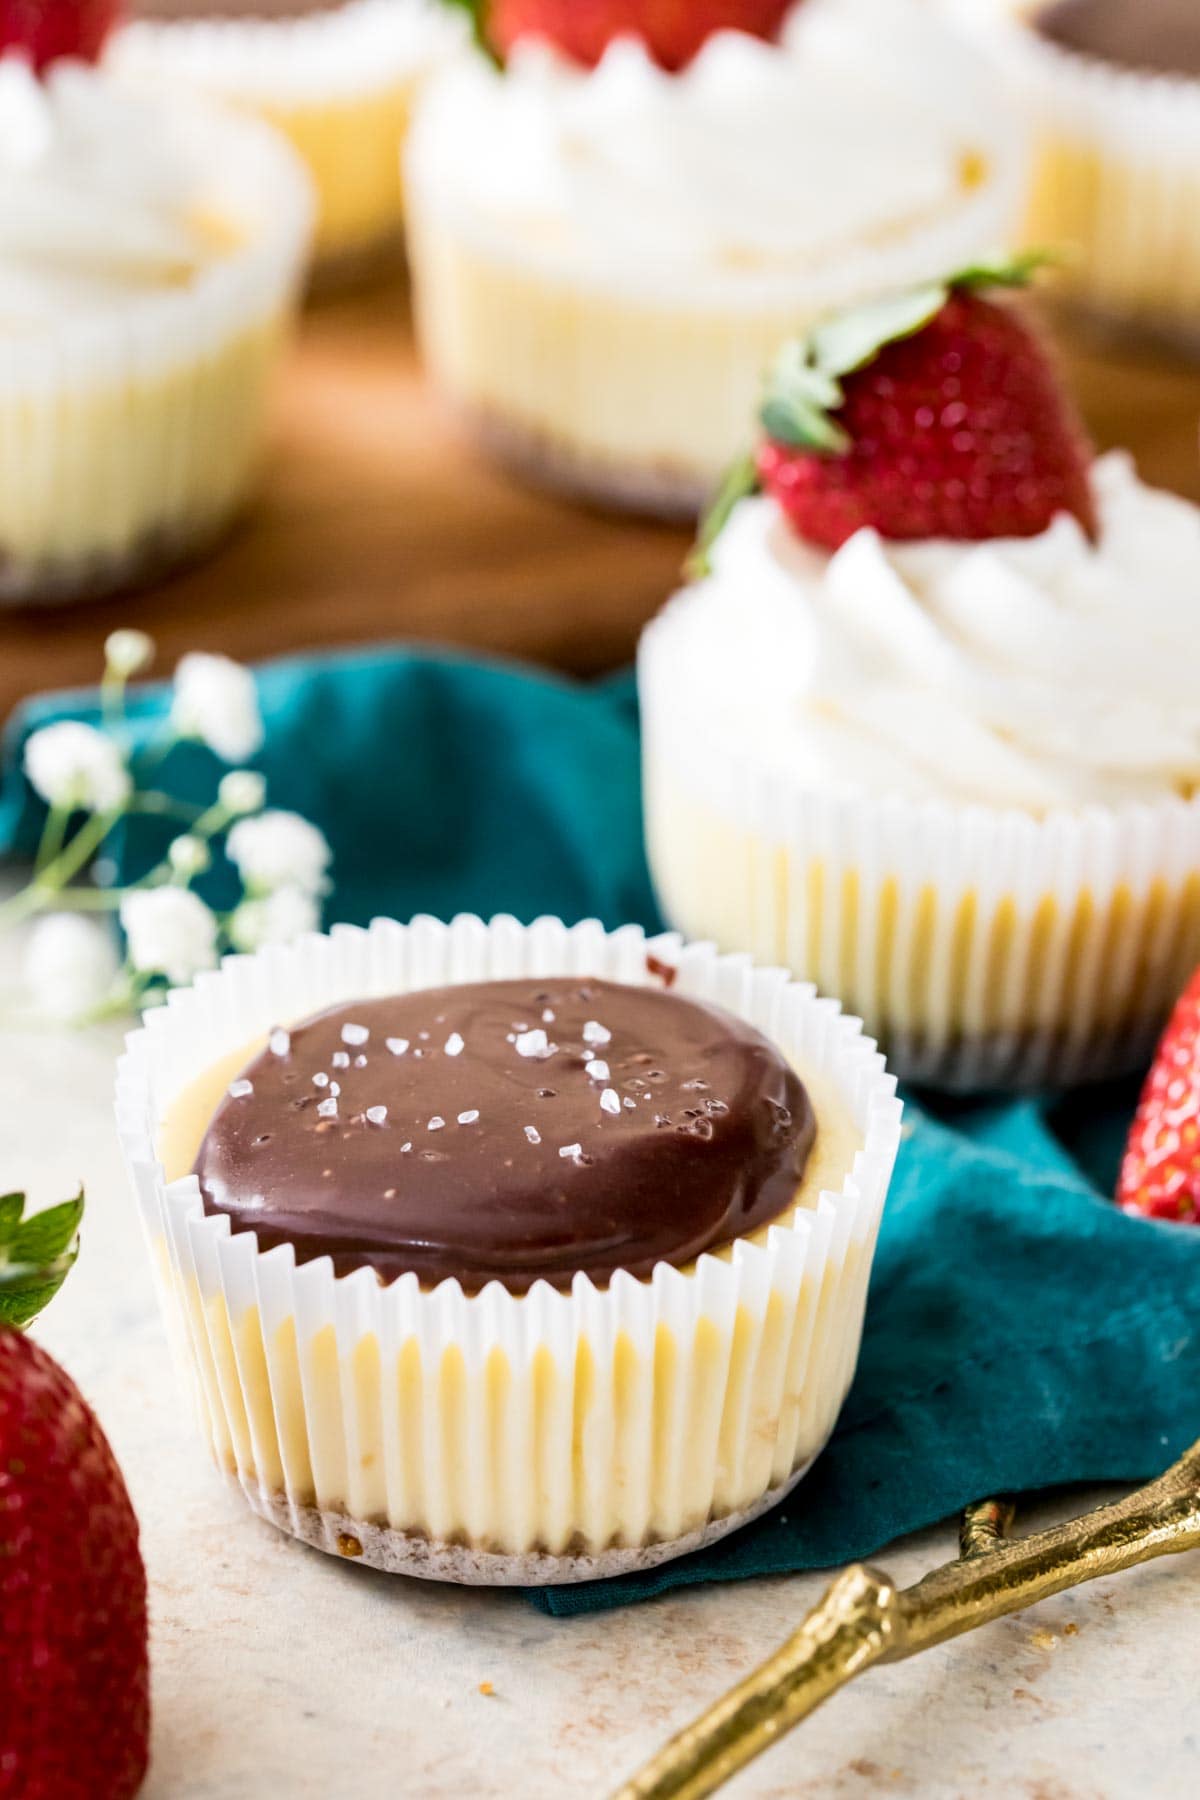 small, individual cheesecake served in a cupcake liner topped with chocolate ganache and sea salt